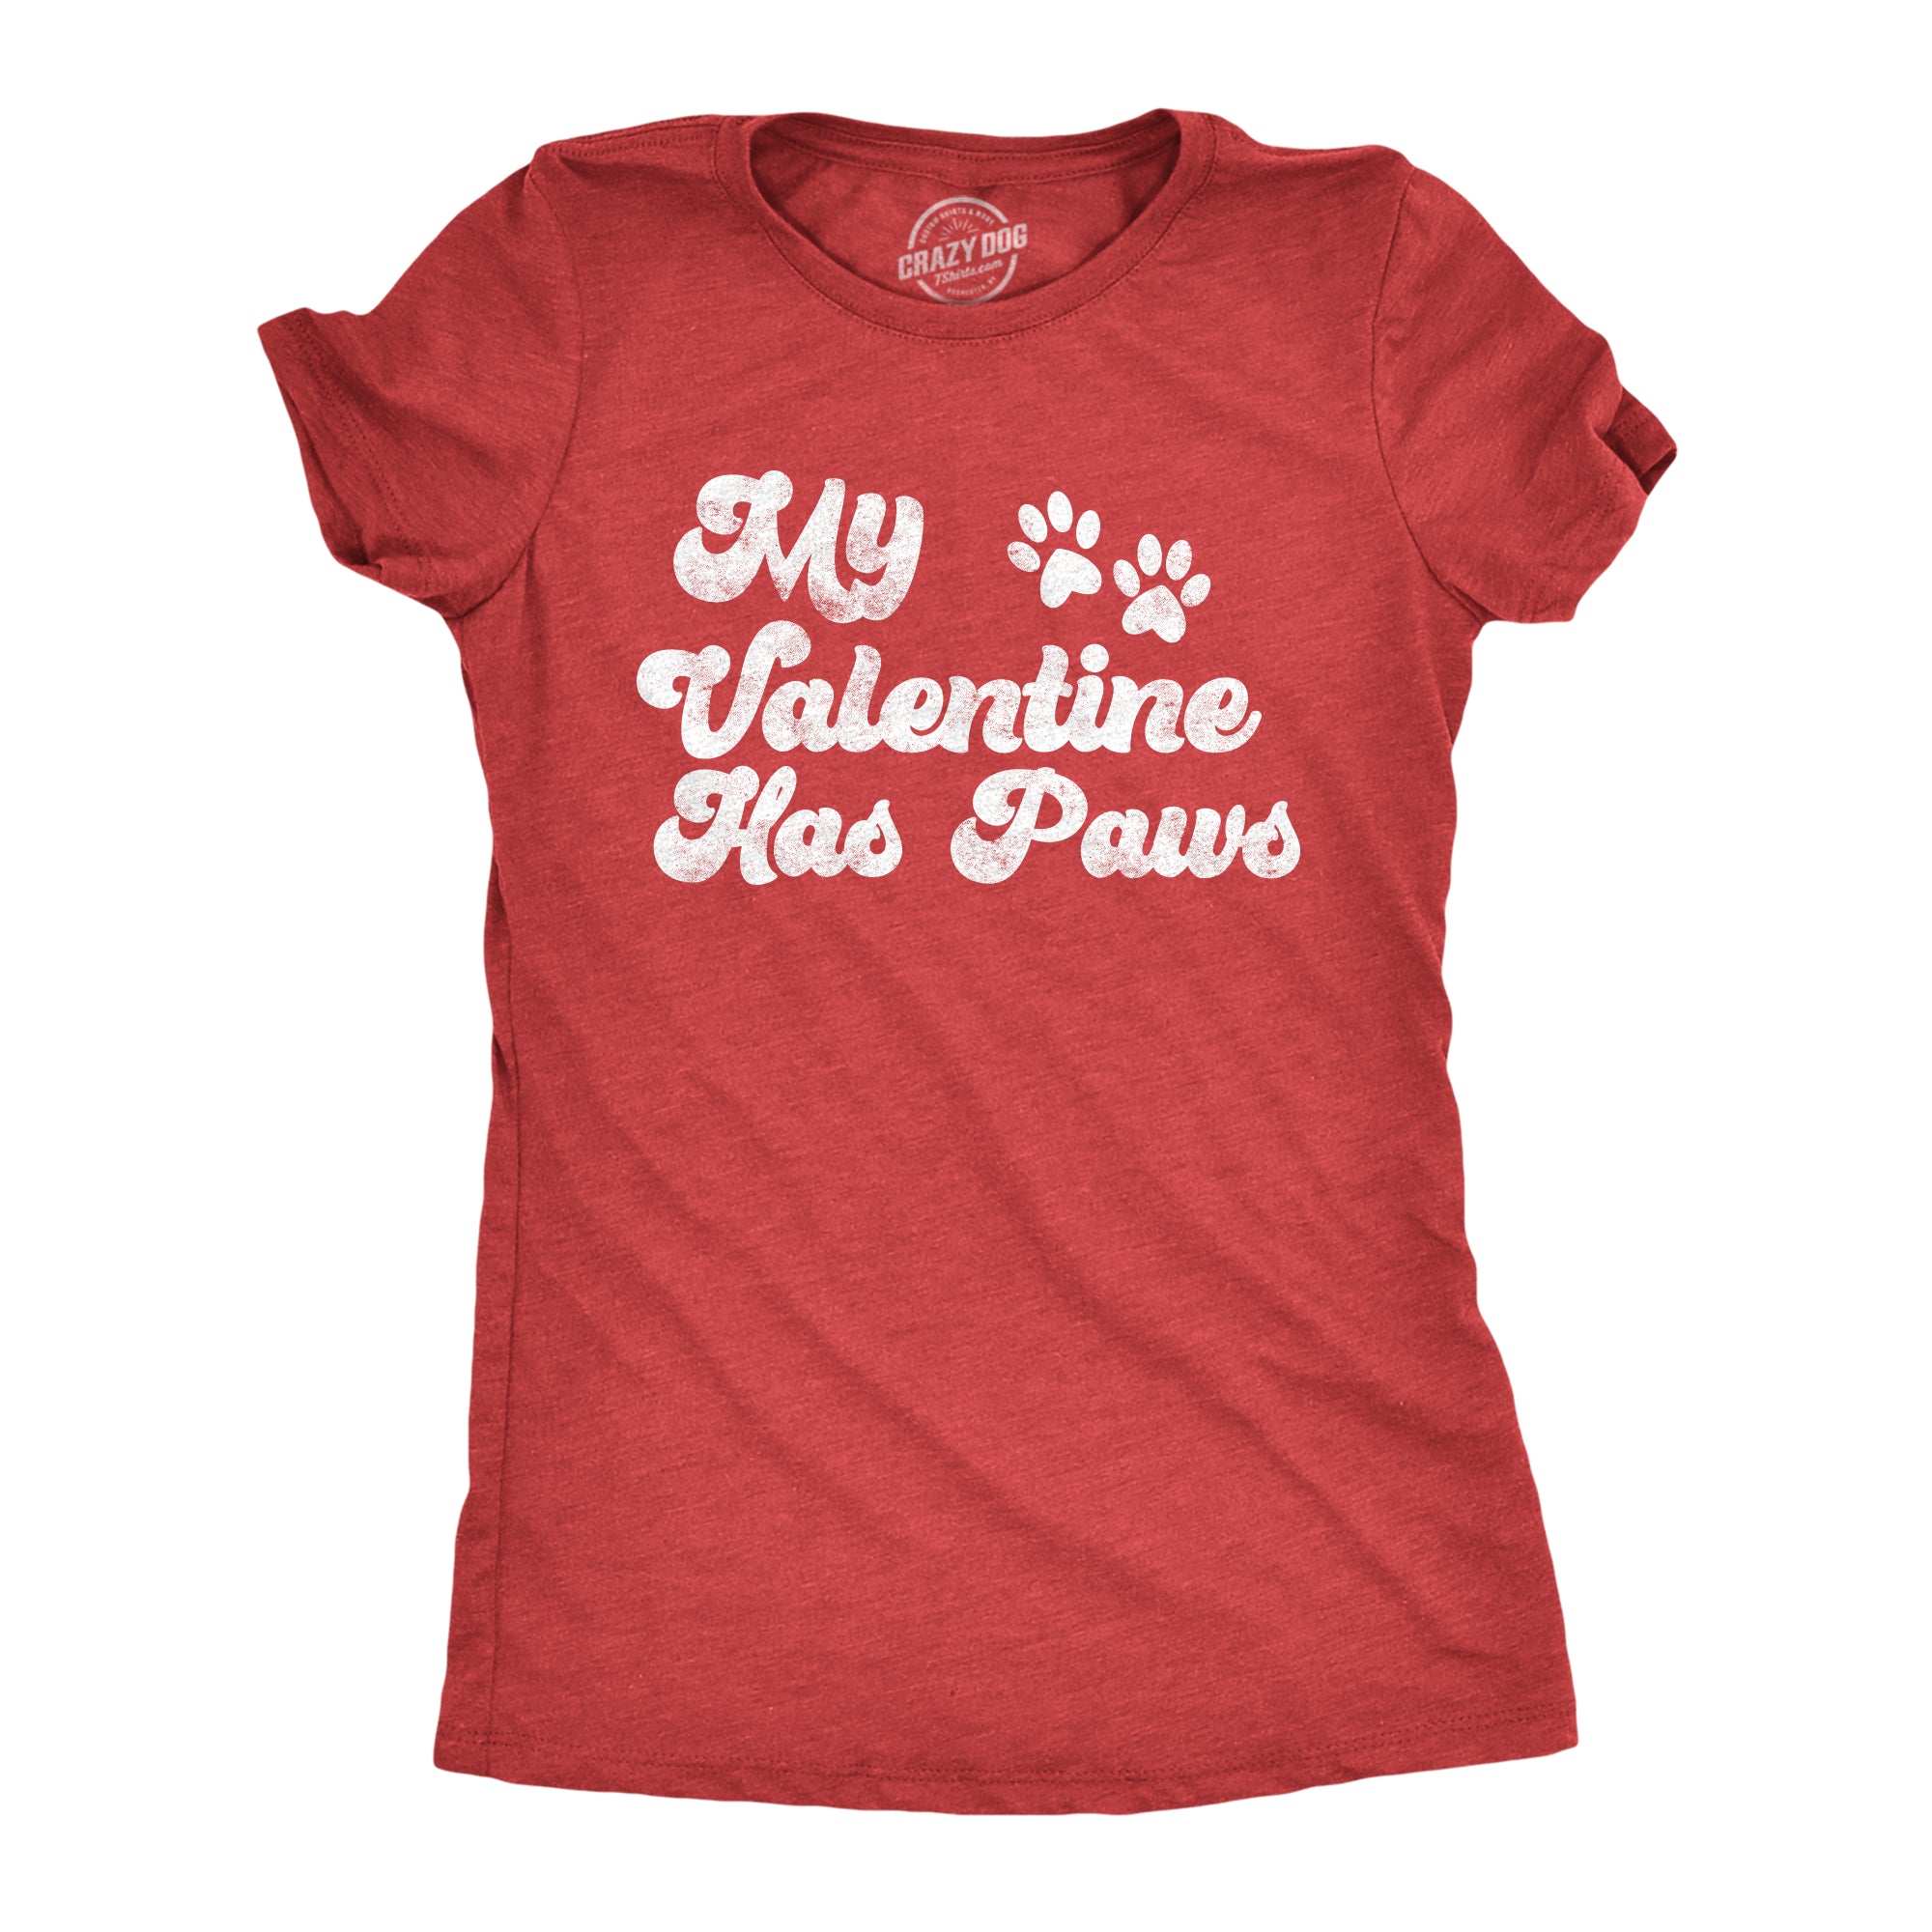 Funny Heather Red - PAWS My Favorite Valentine Has Paws Womens T Shirt Nerdy Valentine's Day Tee